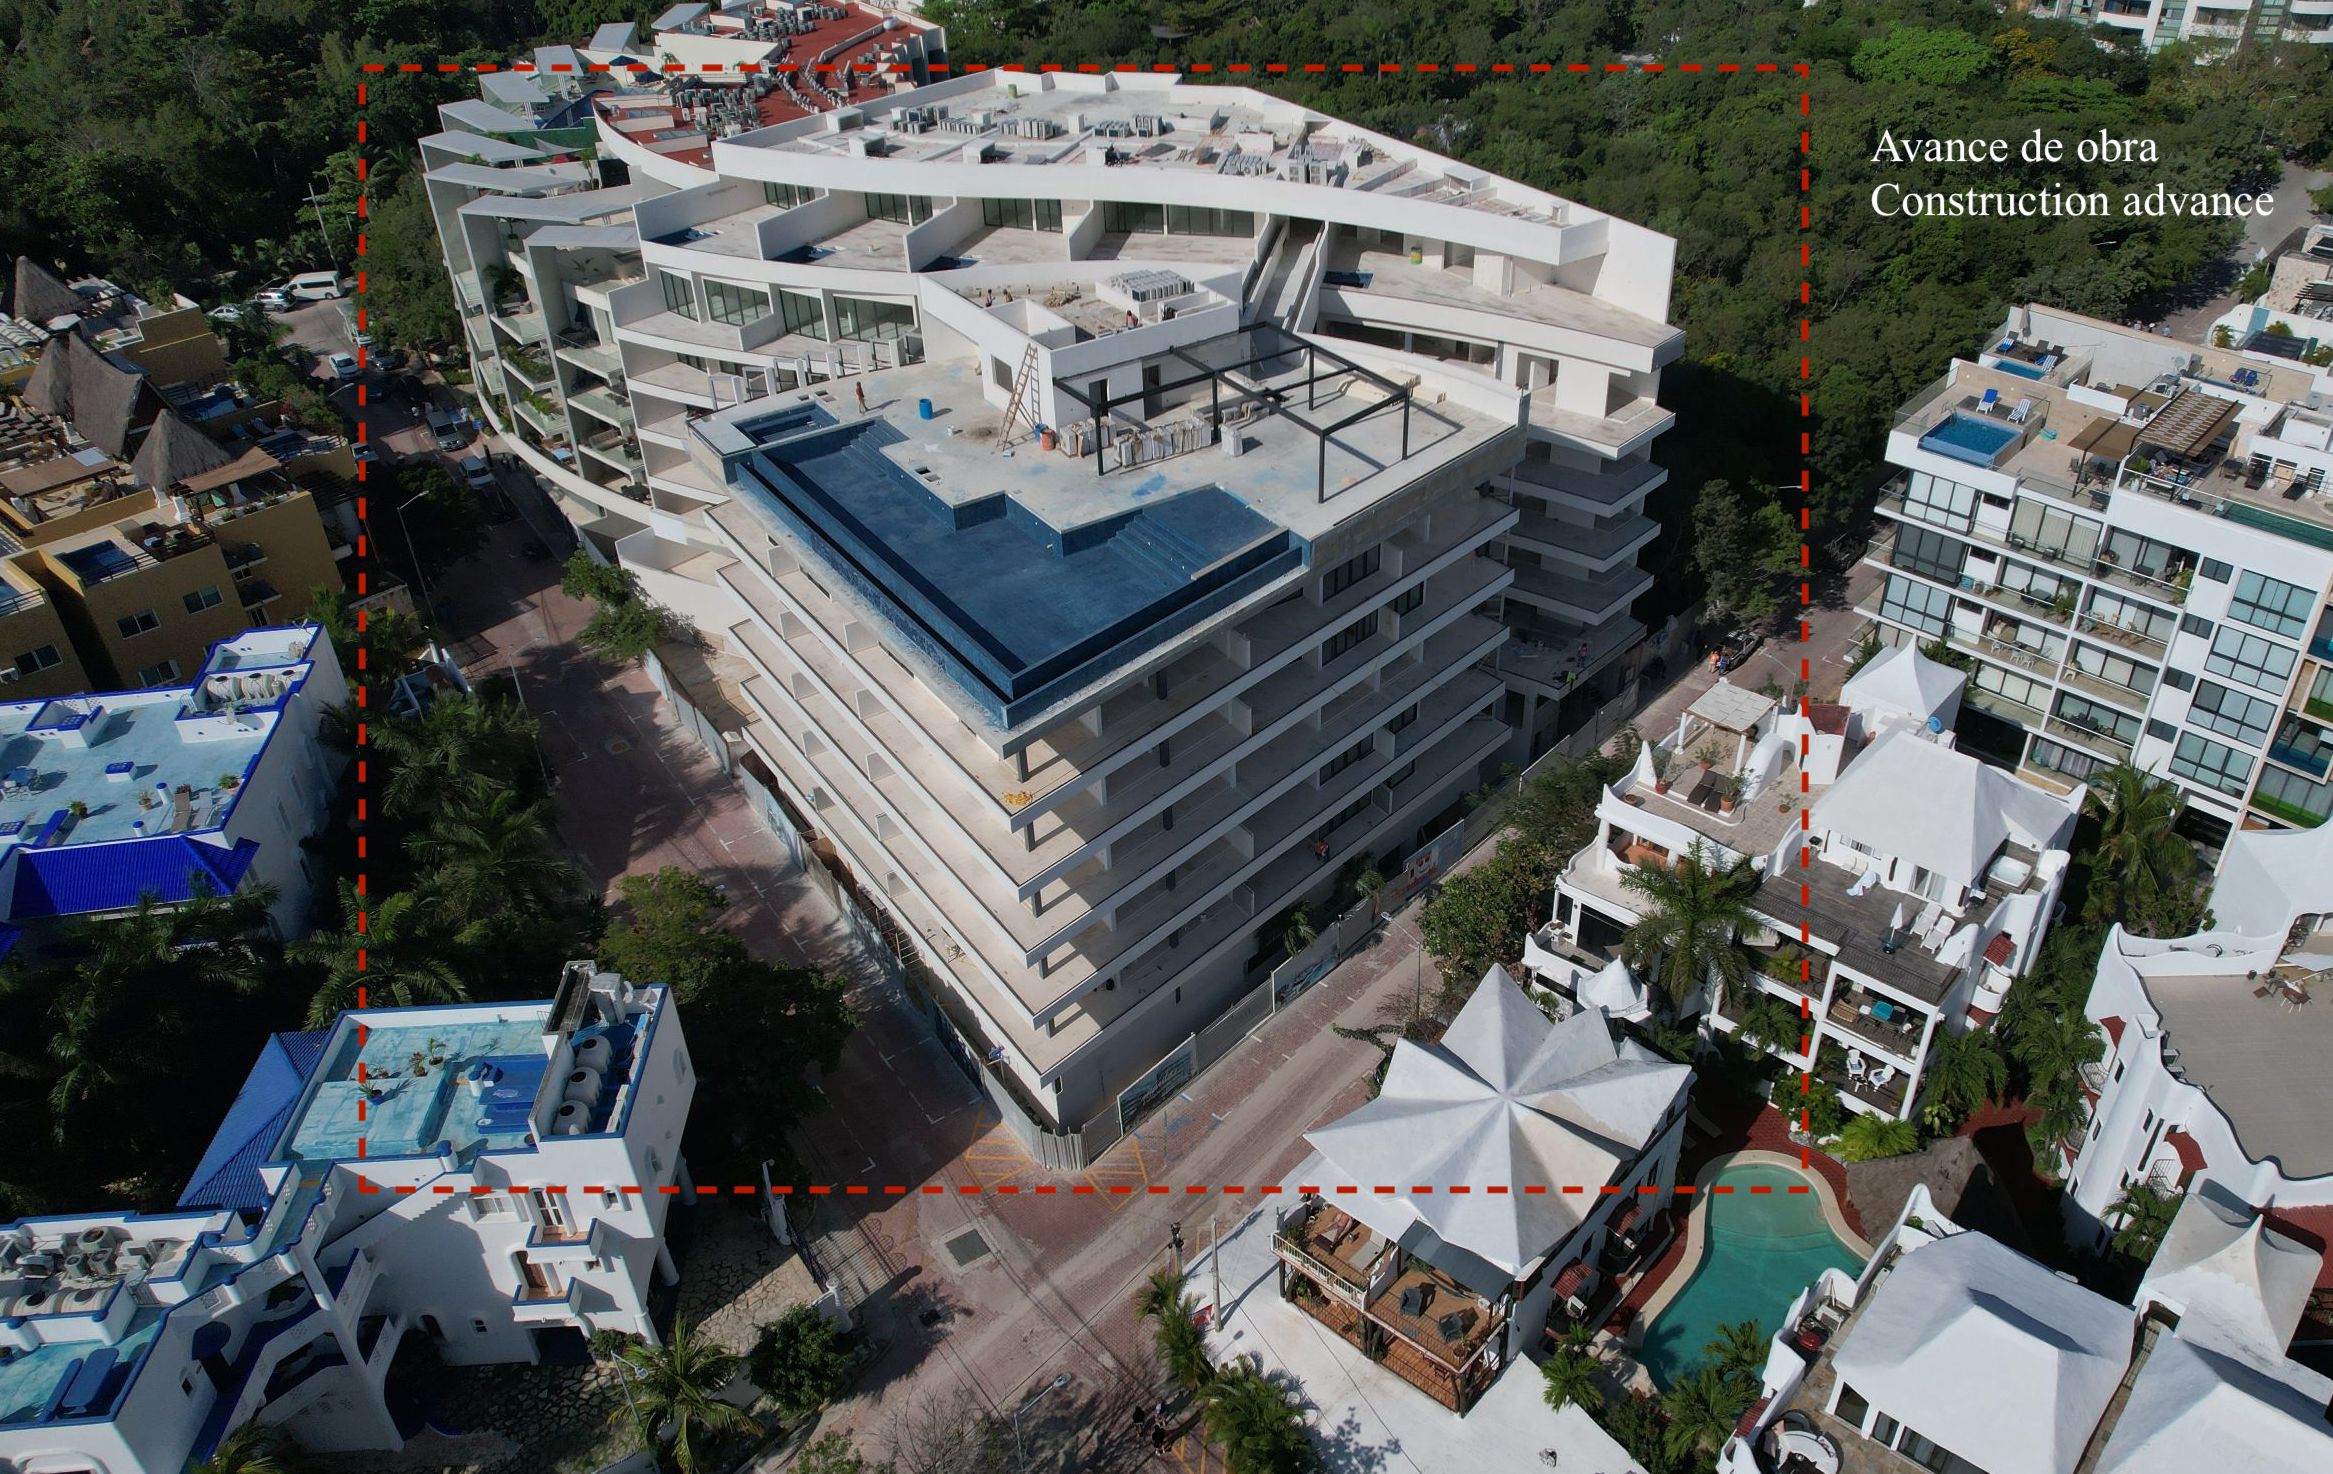 Condo with ocean view from rooftop pool, 150 meters from the beach, in Playacar Phase 1, marble floor, 2 parking spaces, swimming lane